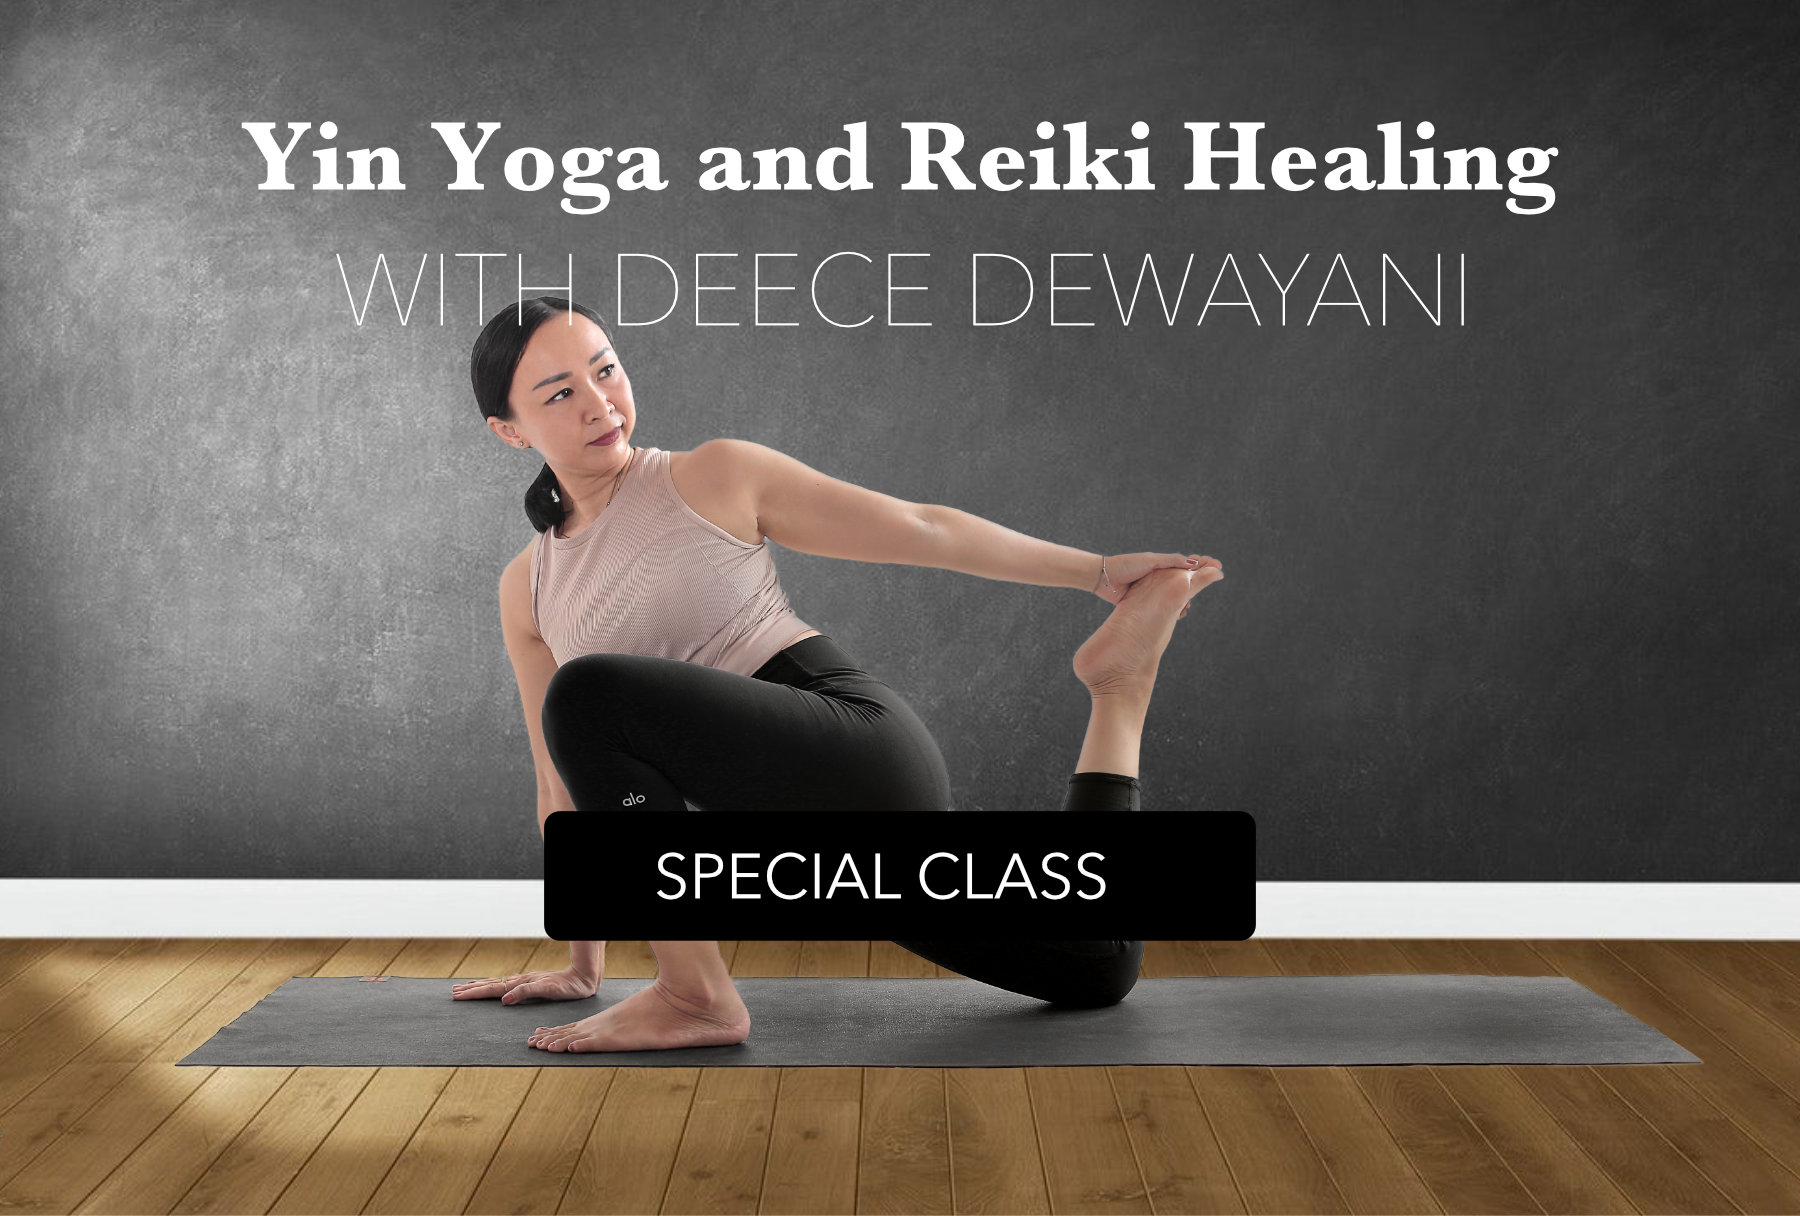 Soul Tree Yoga and Reiki - What is your favourite yoga pose? It could be  your all-time favourite or your current favourite. Comment below! | Facebook